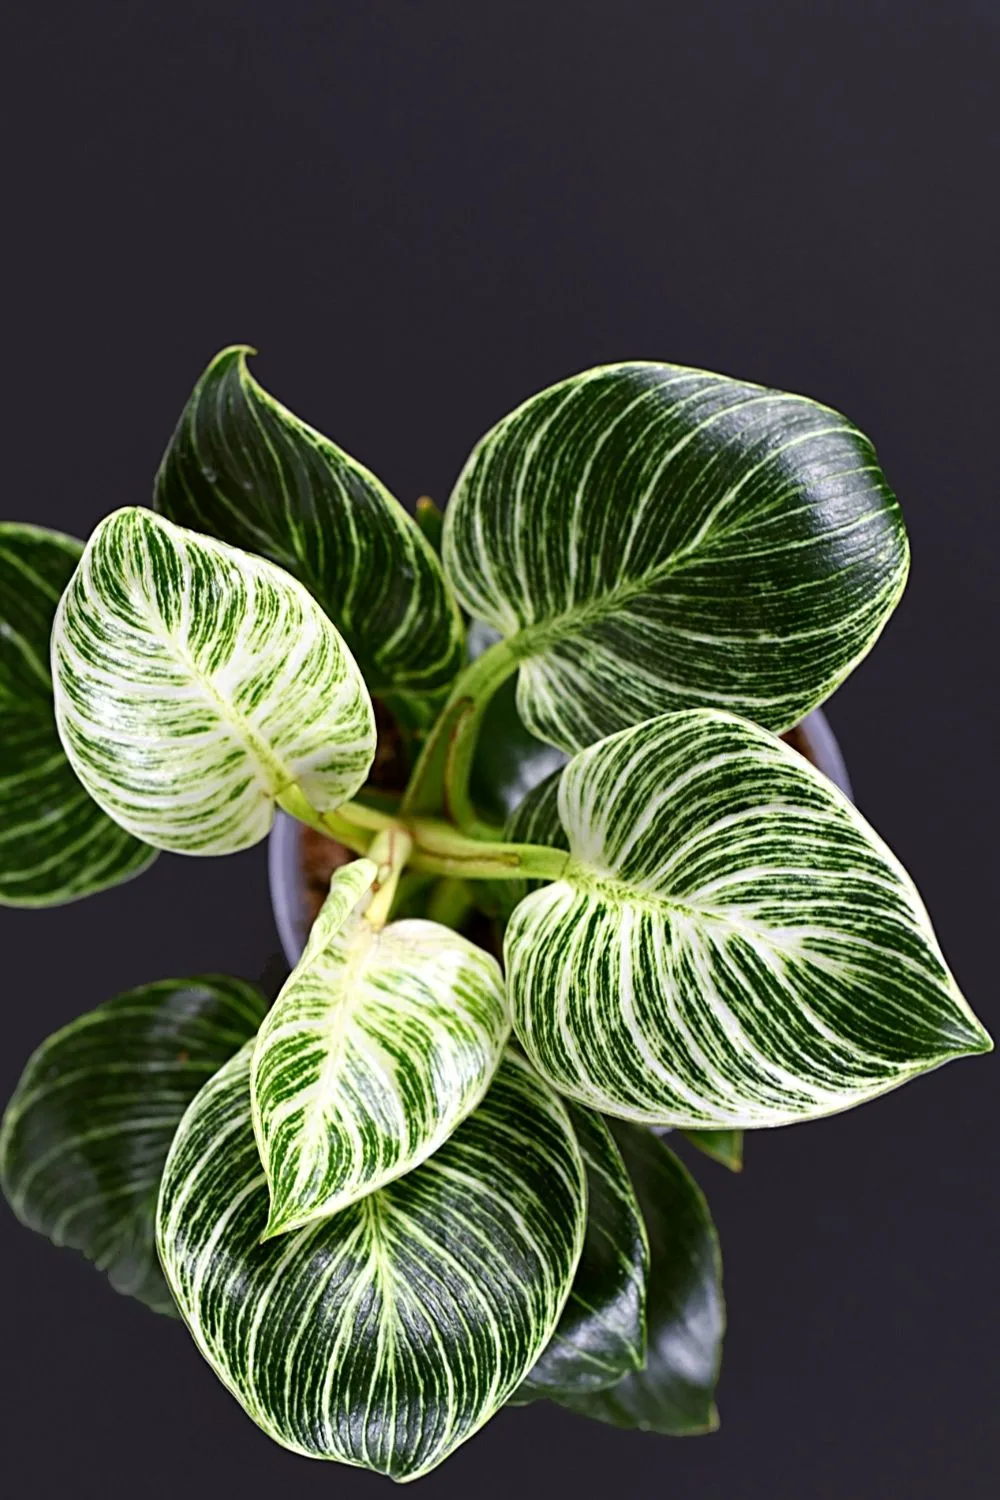 Some Philodendron Birkins can have leaves of varying colors, some with stripes and some without